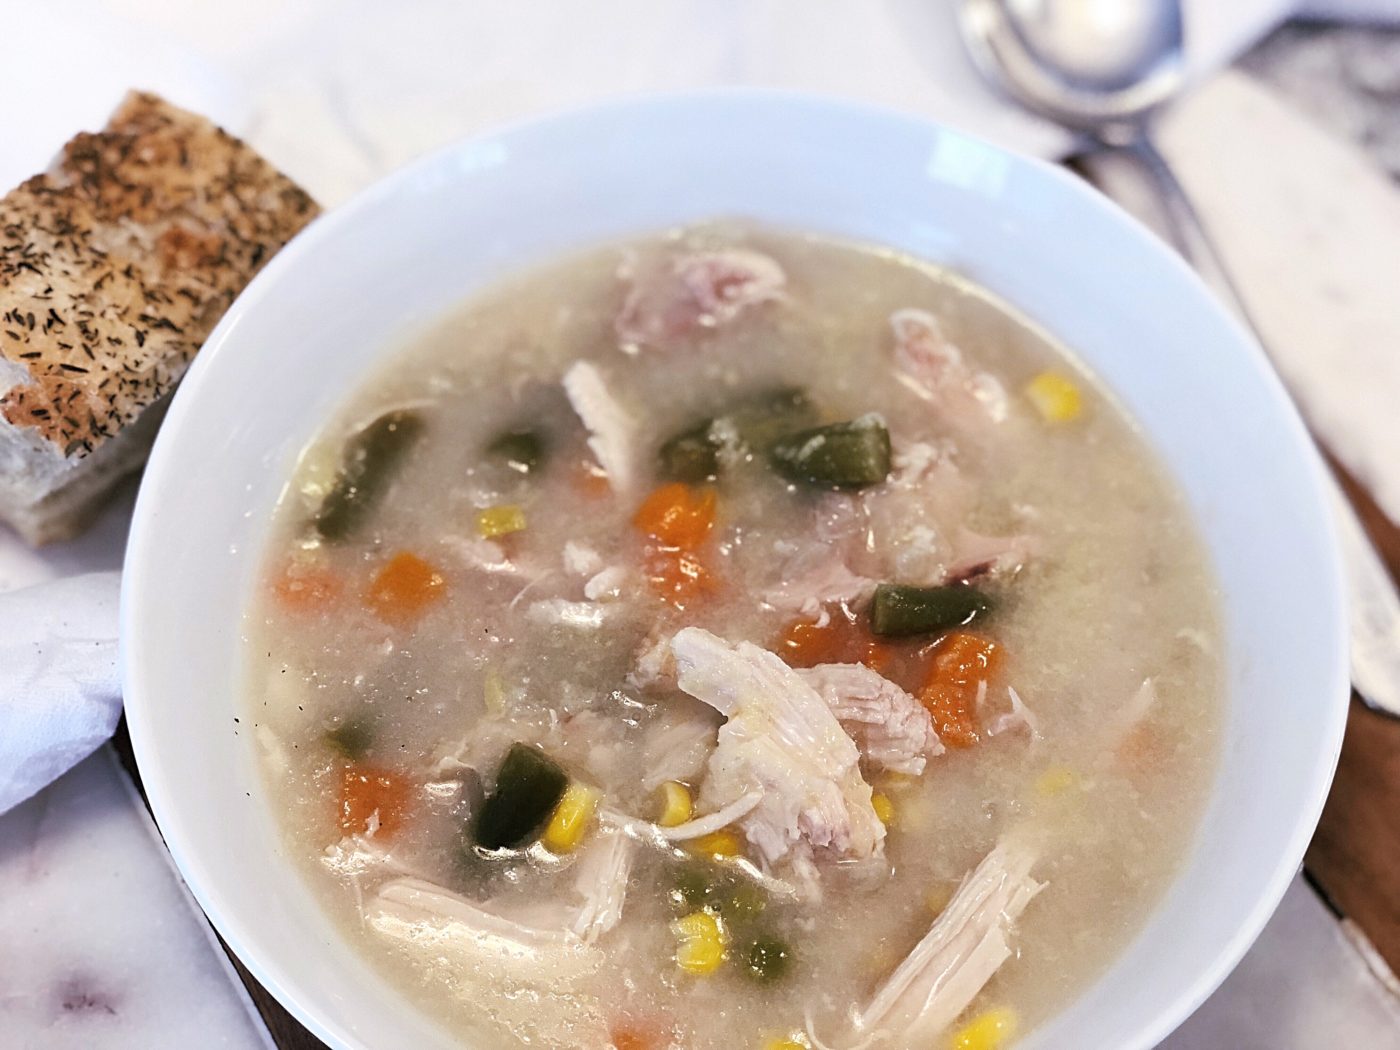 Chicken Soup 101. The best and easiest recipe for a great bowl of goodness!